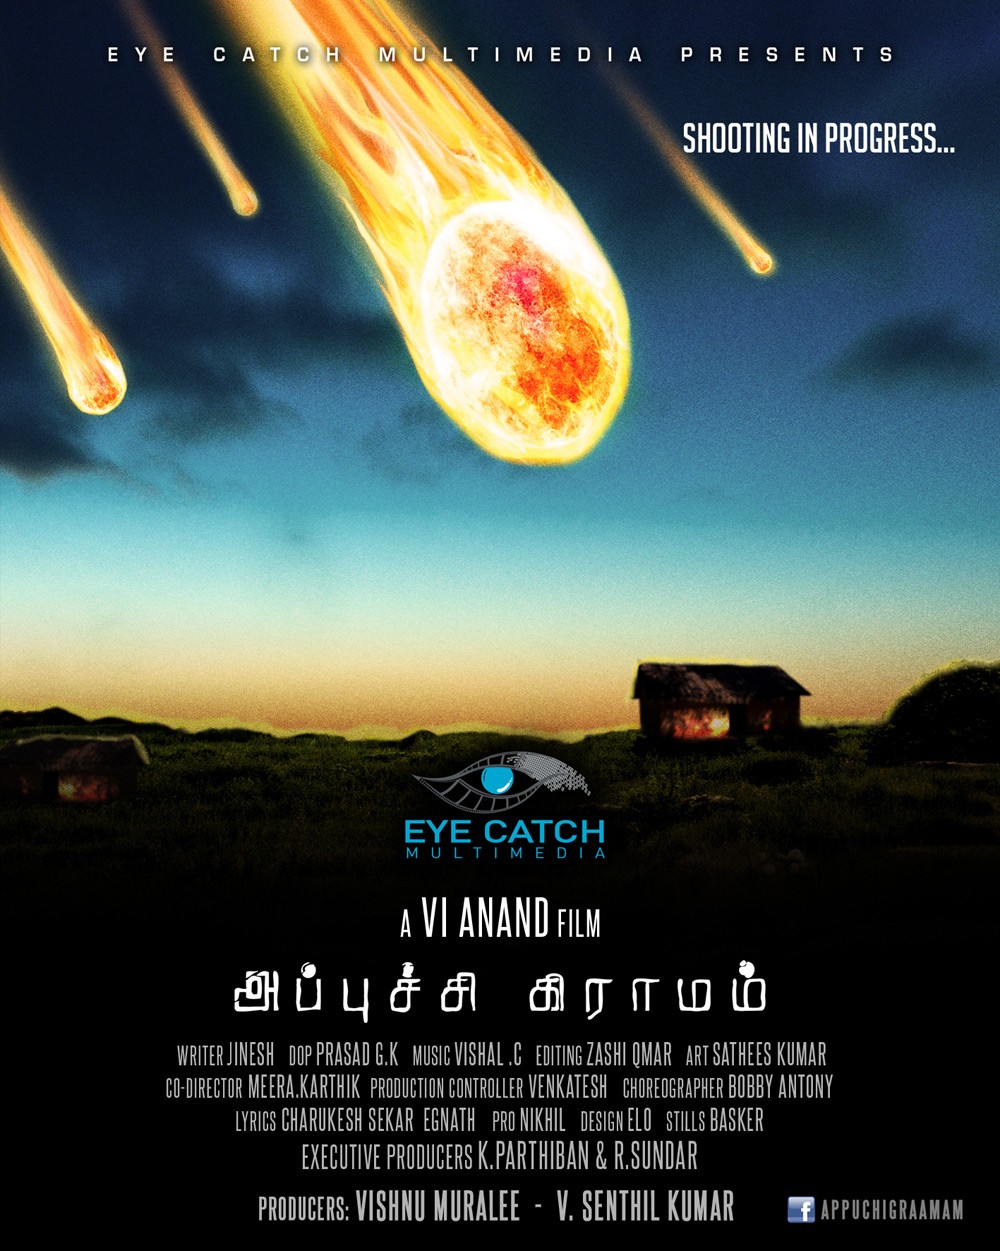 Extra Large Movie Poster Image for Appuchi Graamam (#3 of 4)